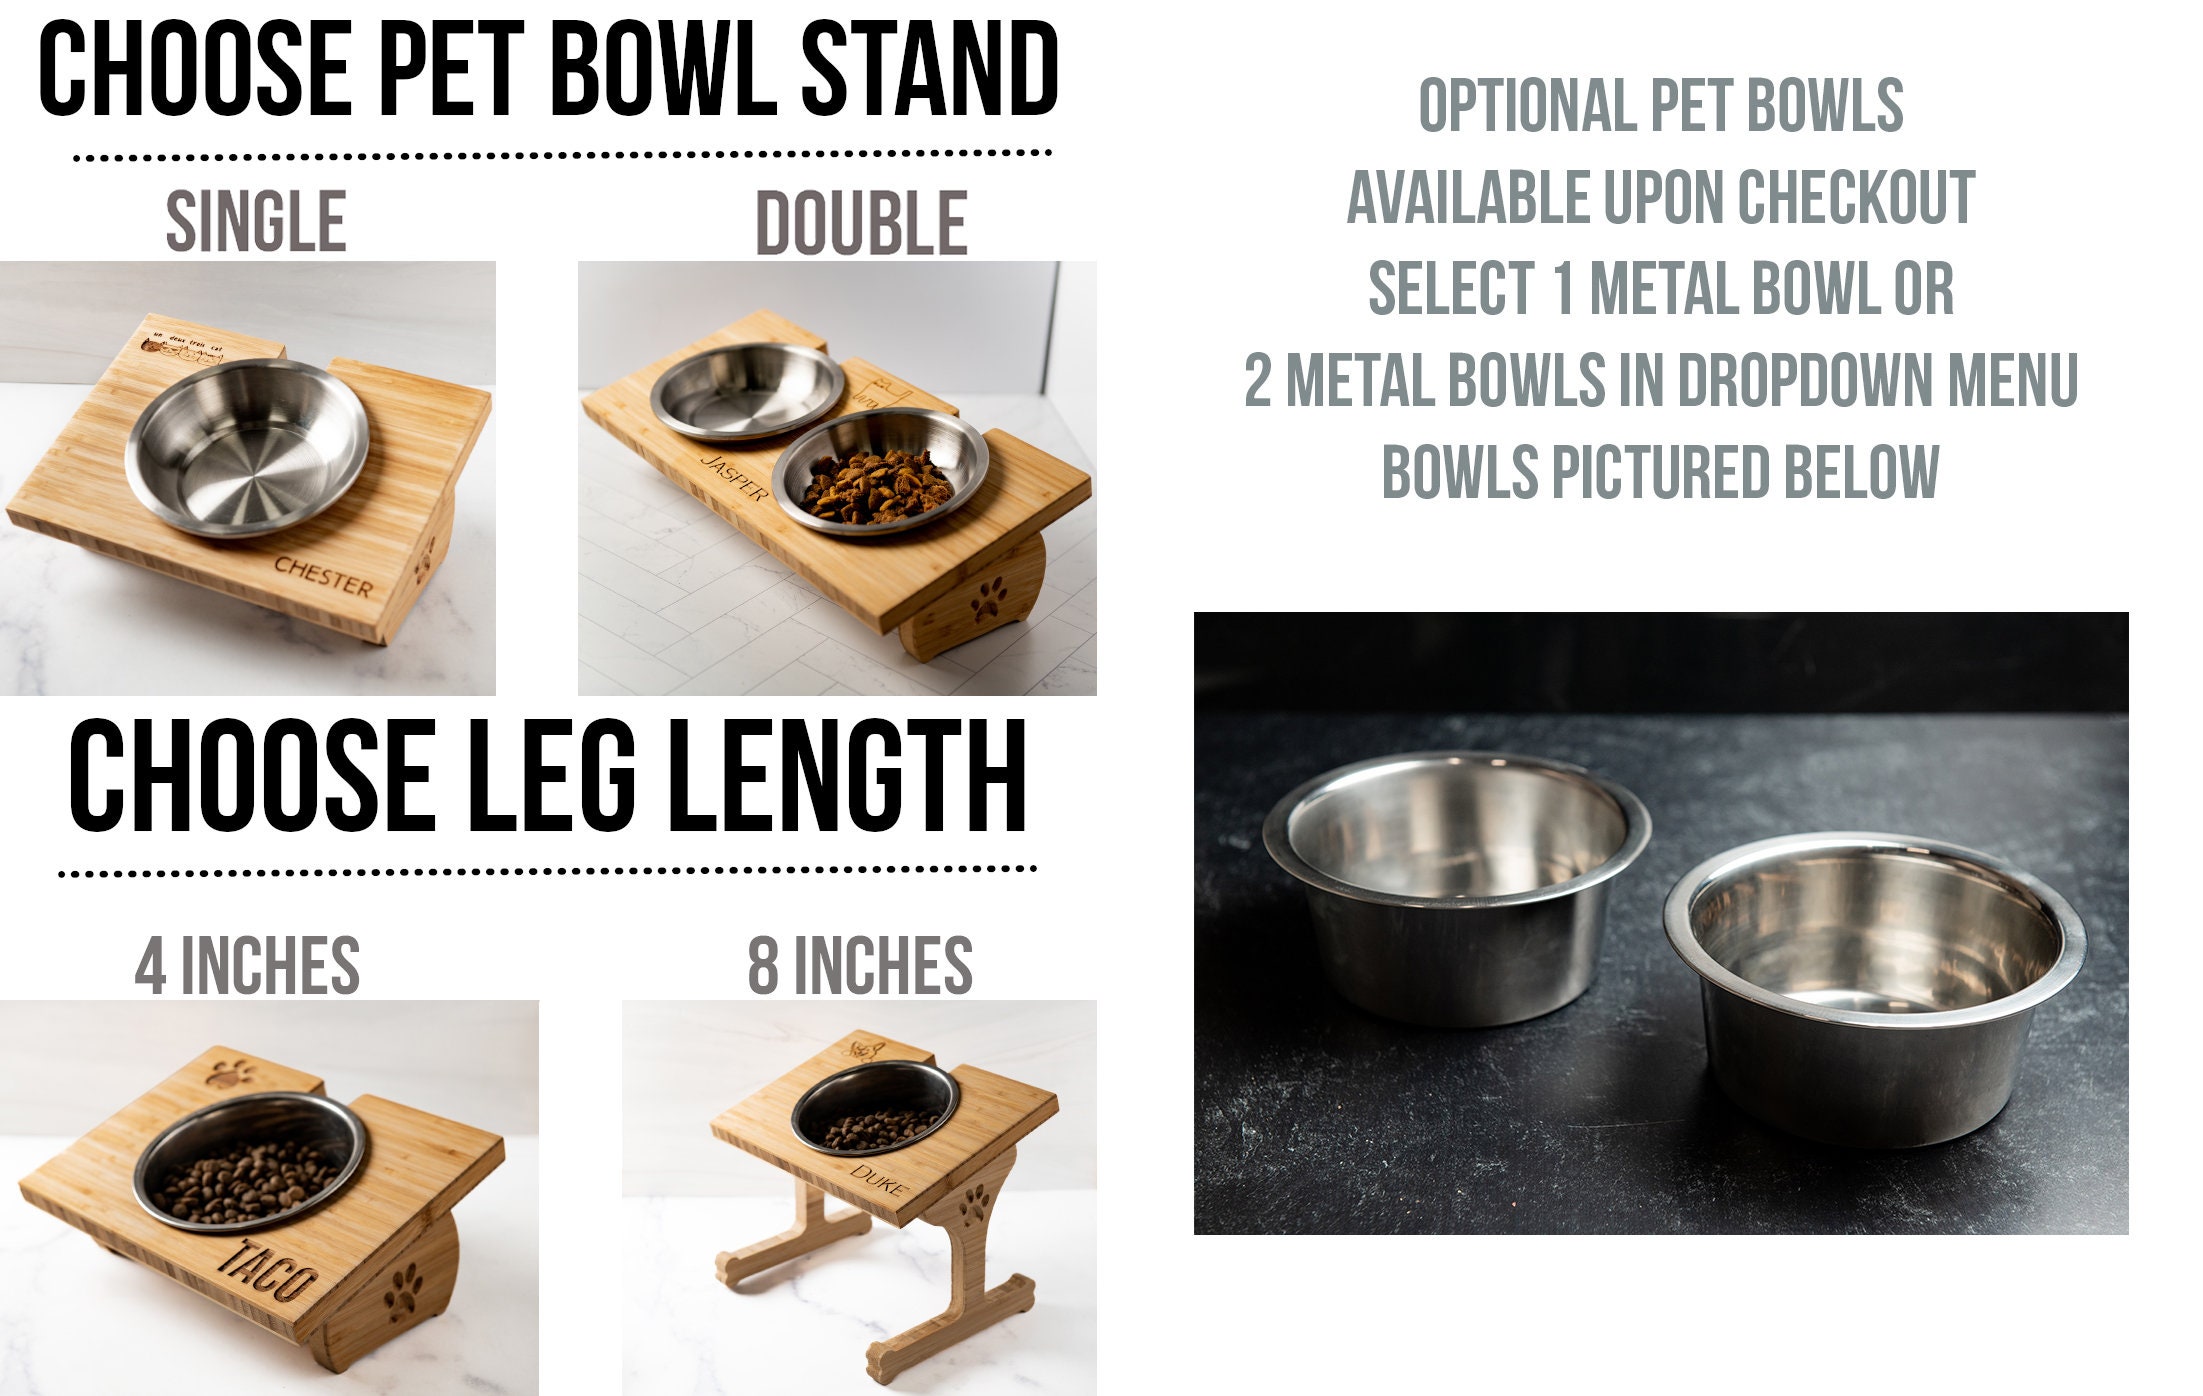 Gorilla Grip Stainless Steel Metal Dog Bowl Set of 2, 4 Cups, Rubber Base, Heavy Duty, Rust Resistant, Food Grade BPA Free, Less